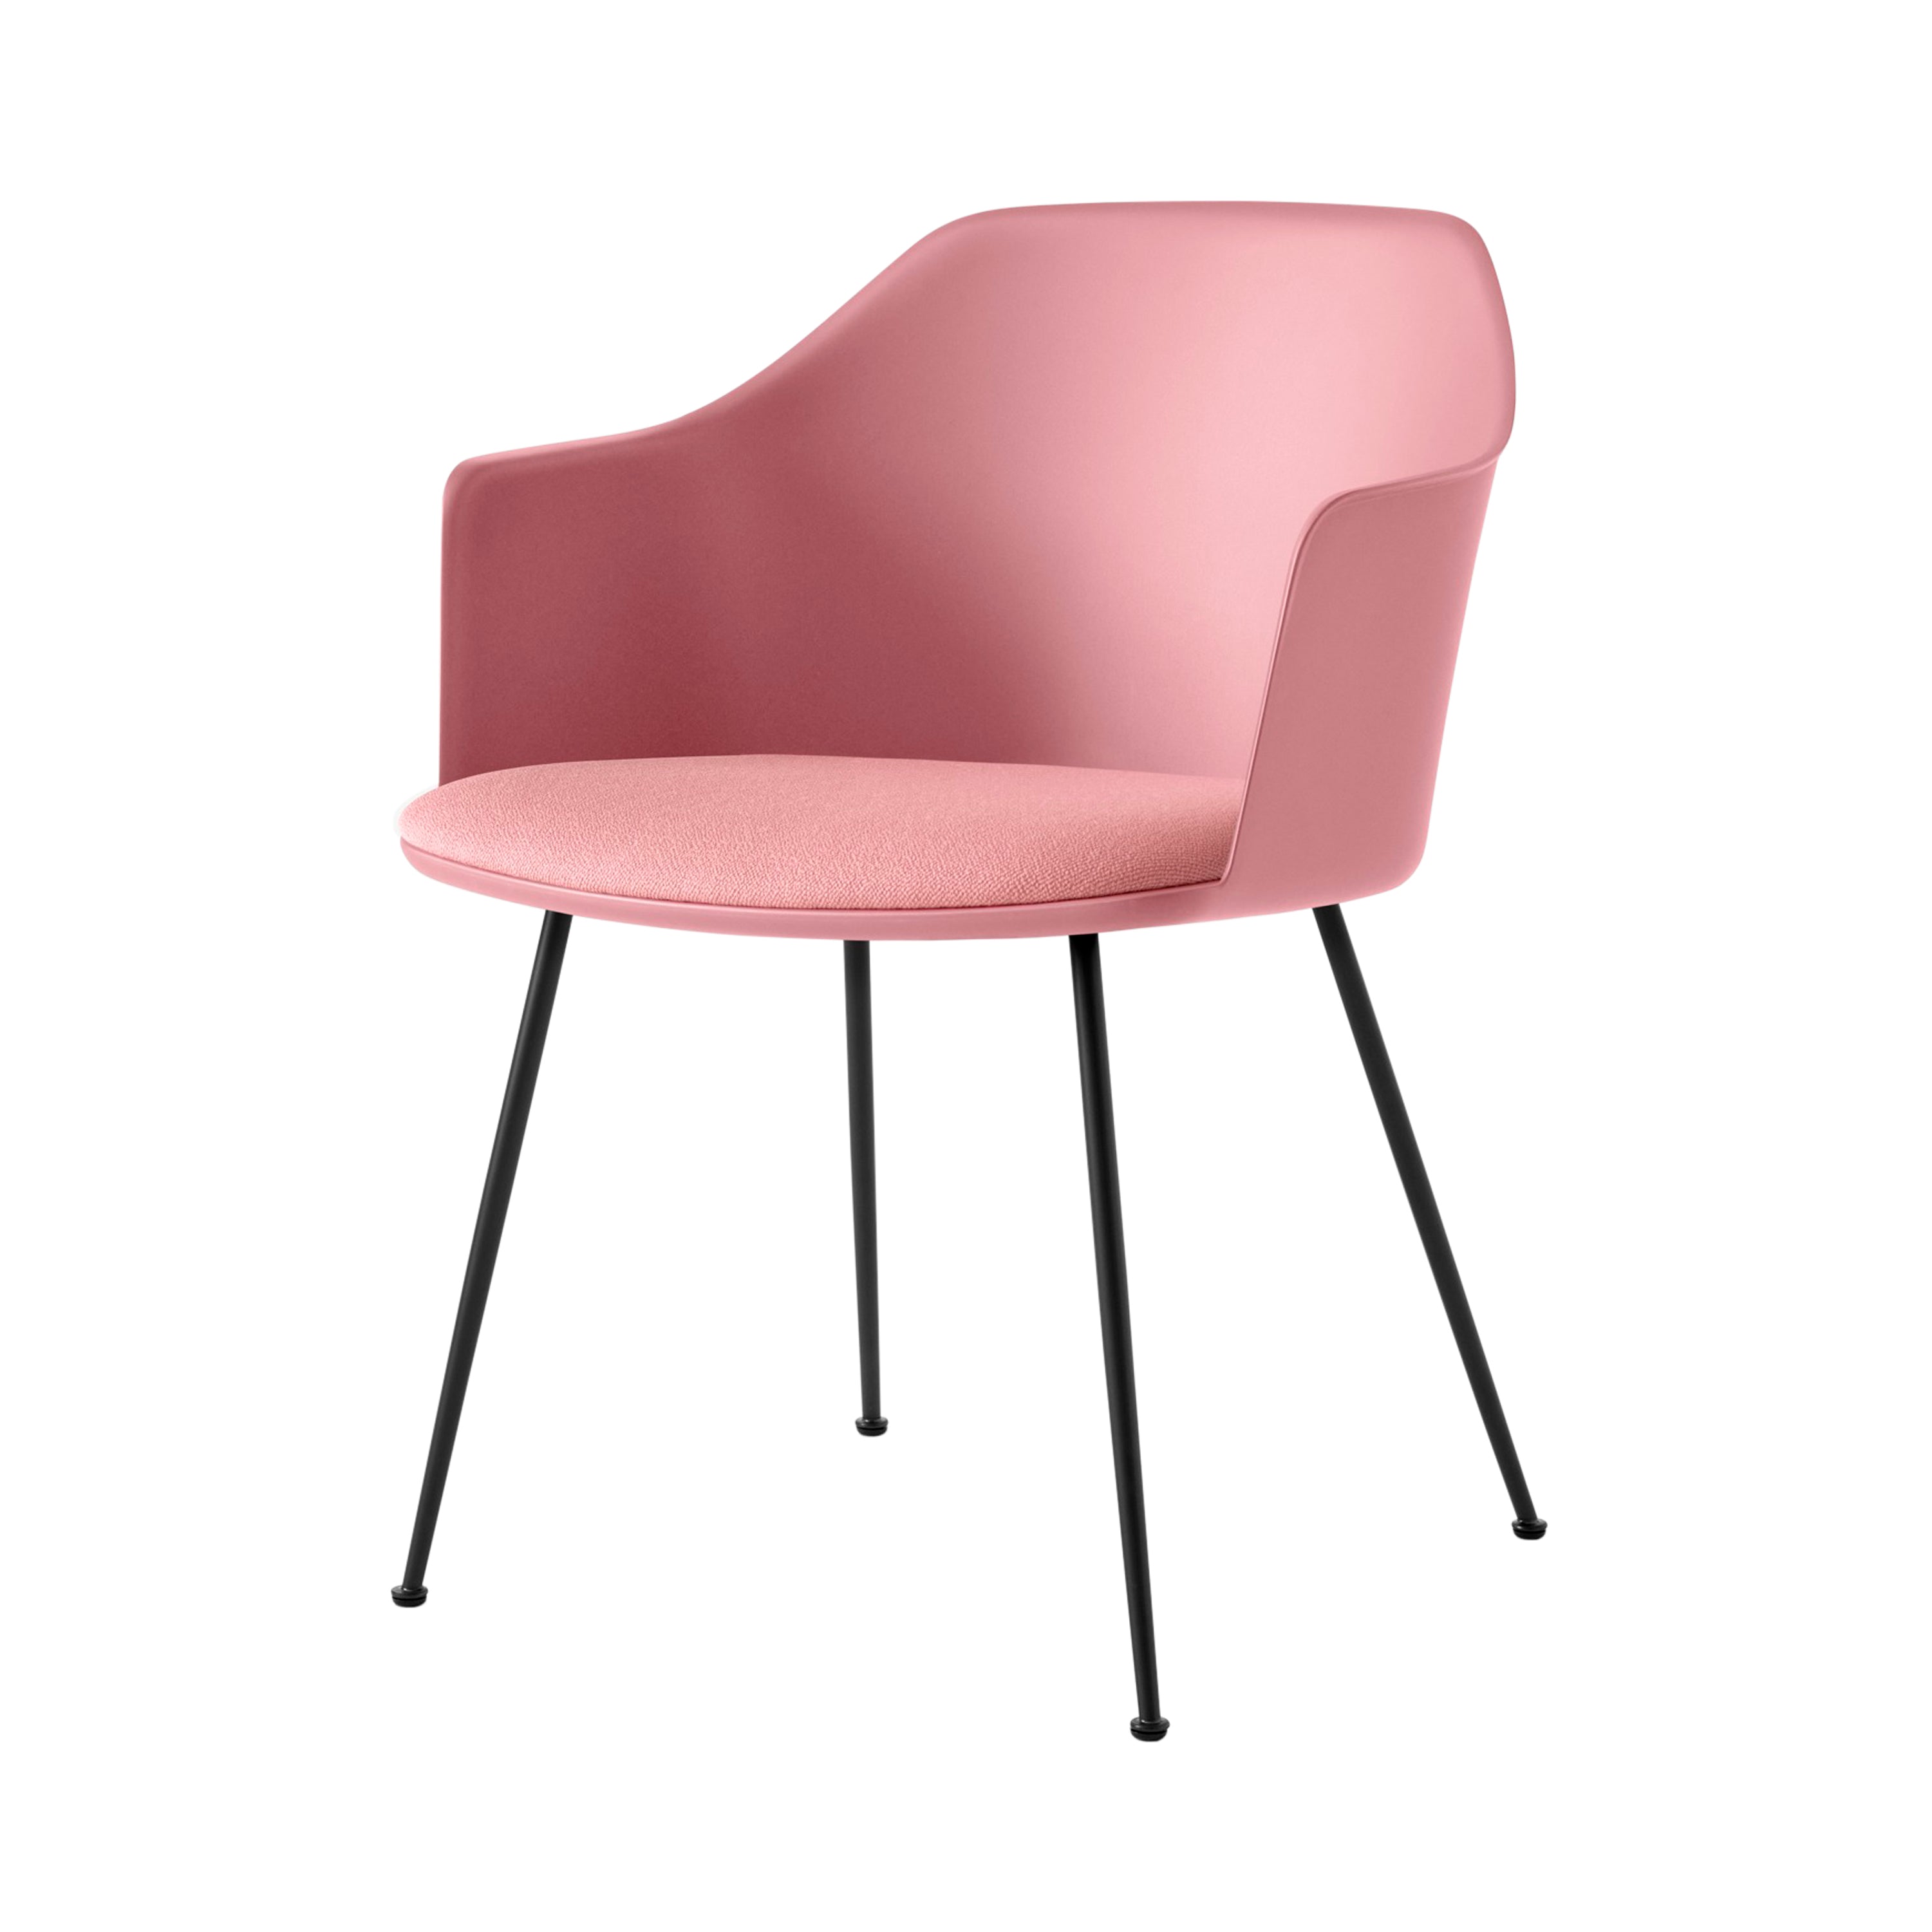 Rely Armchair HW34: Soft Pink + Black